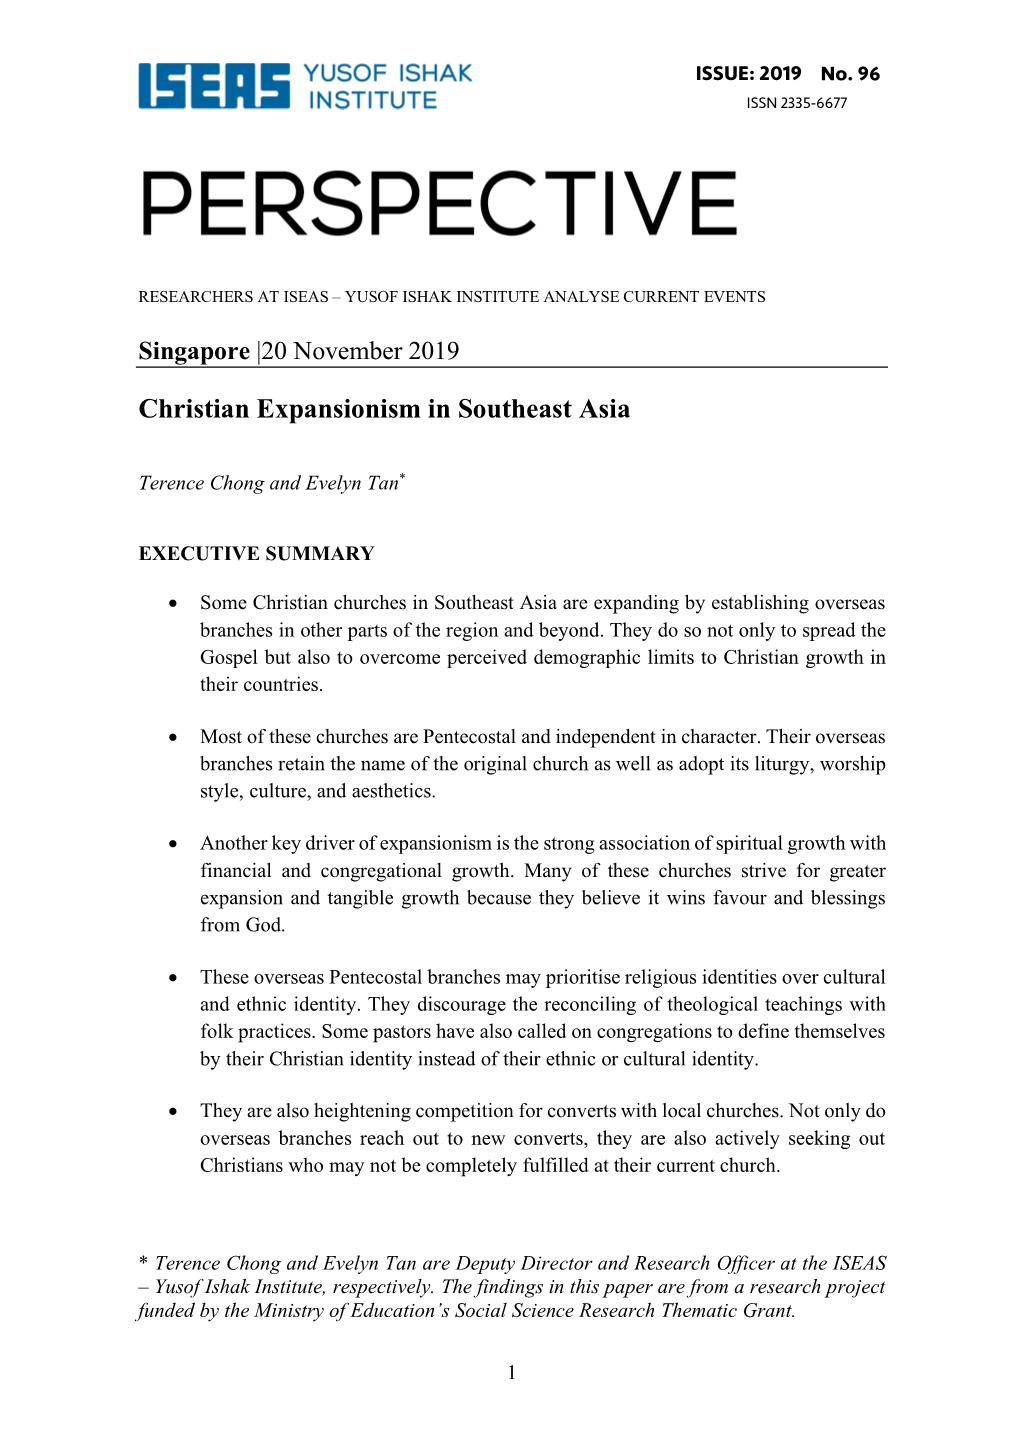 Christian Expansionism in Southeast Asia